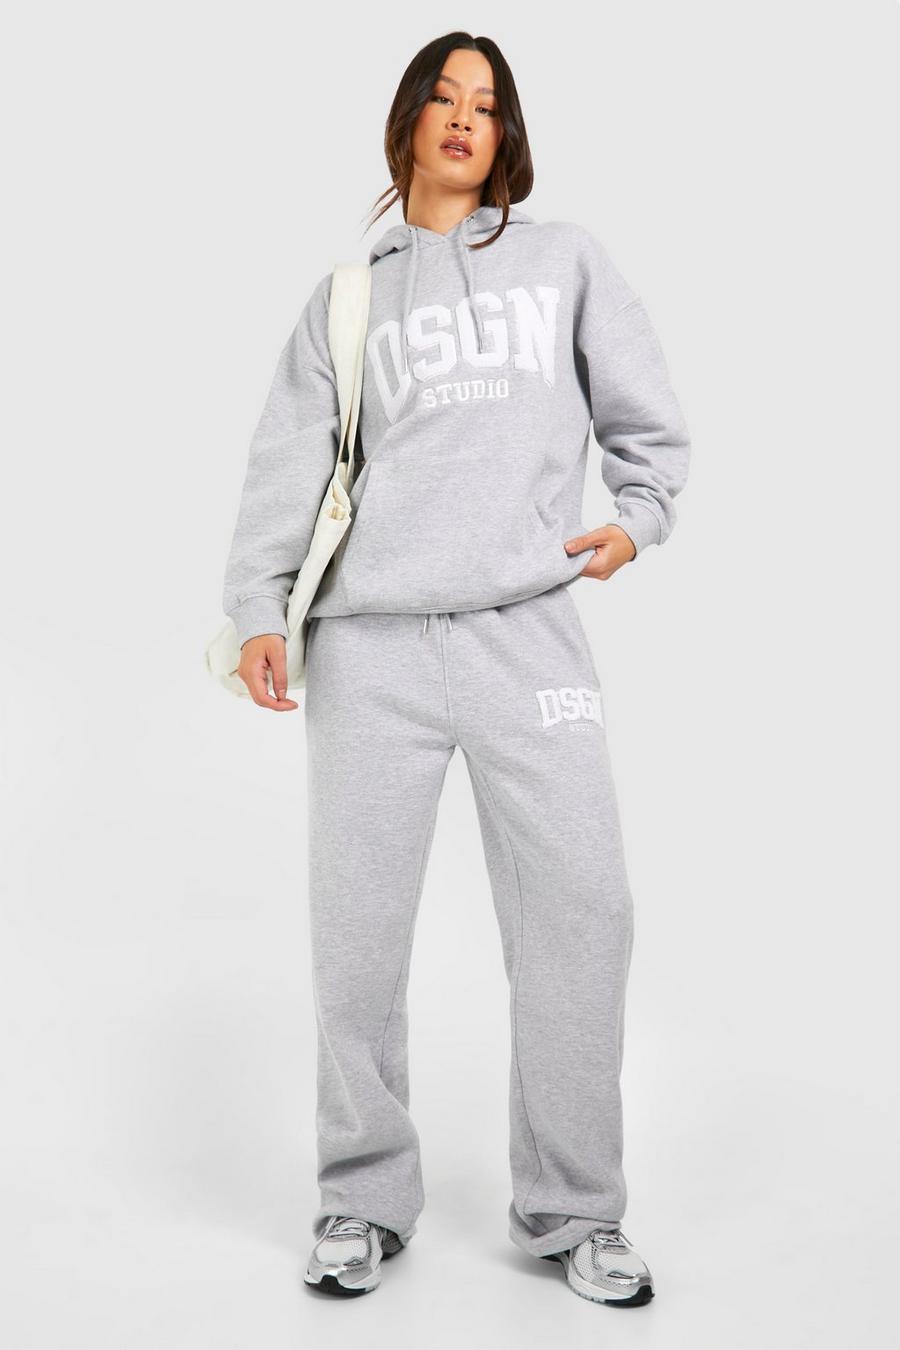 Grey marl Tall Dsgn Studio Hoody & Track Pants Tracksuit image number 1